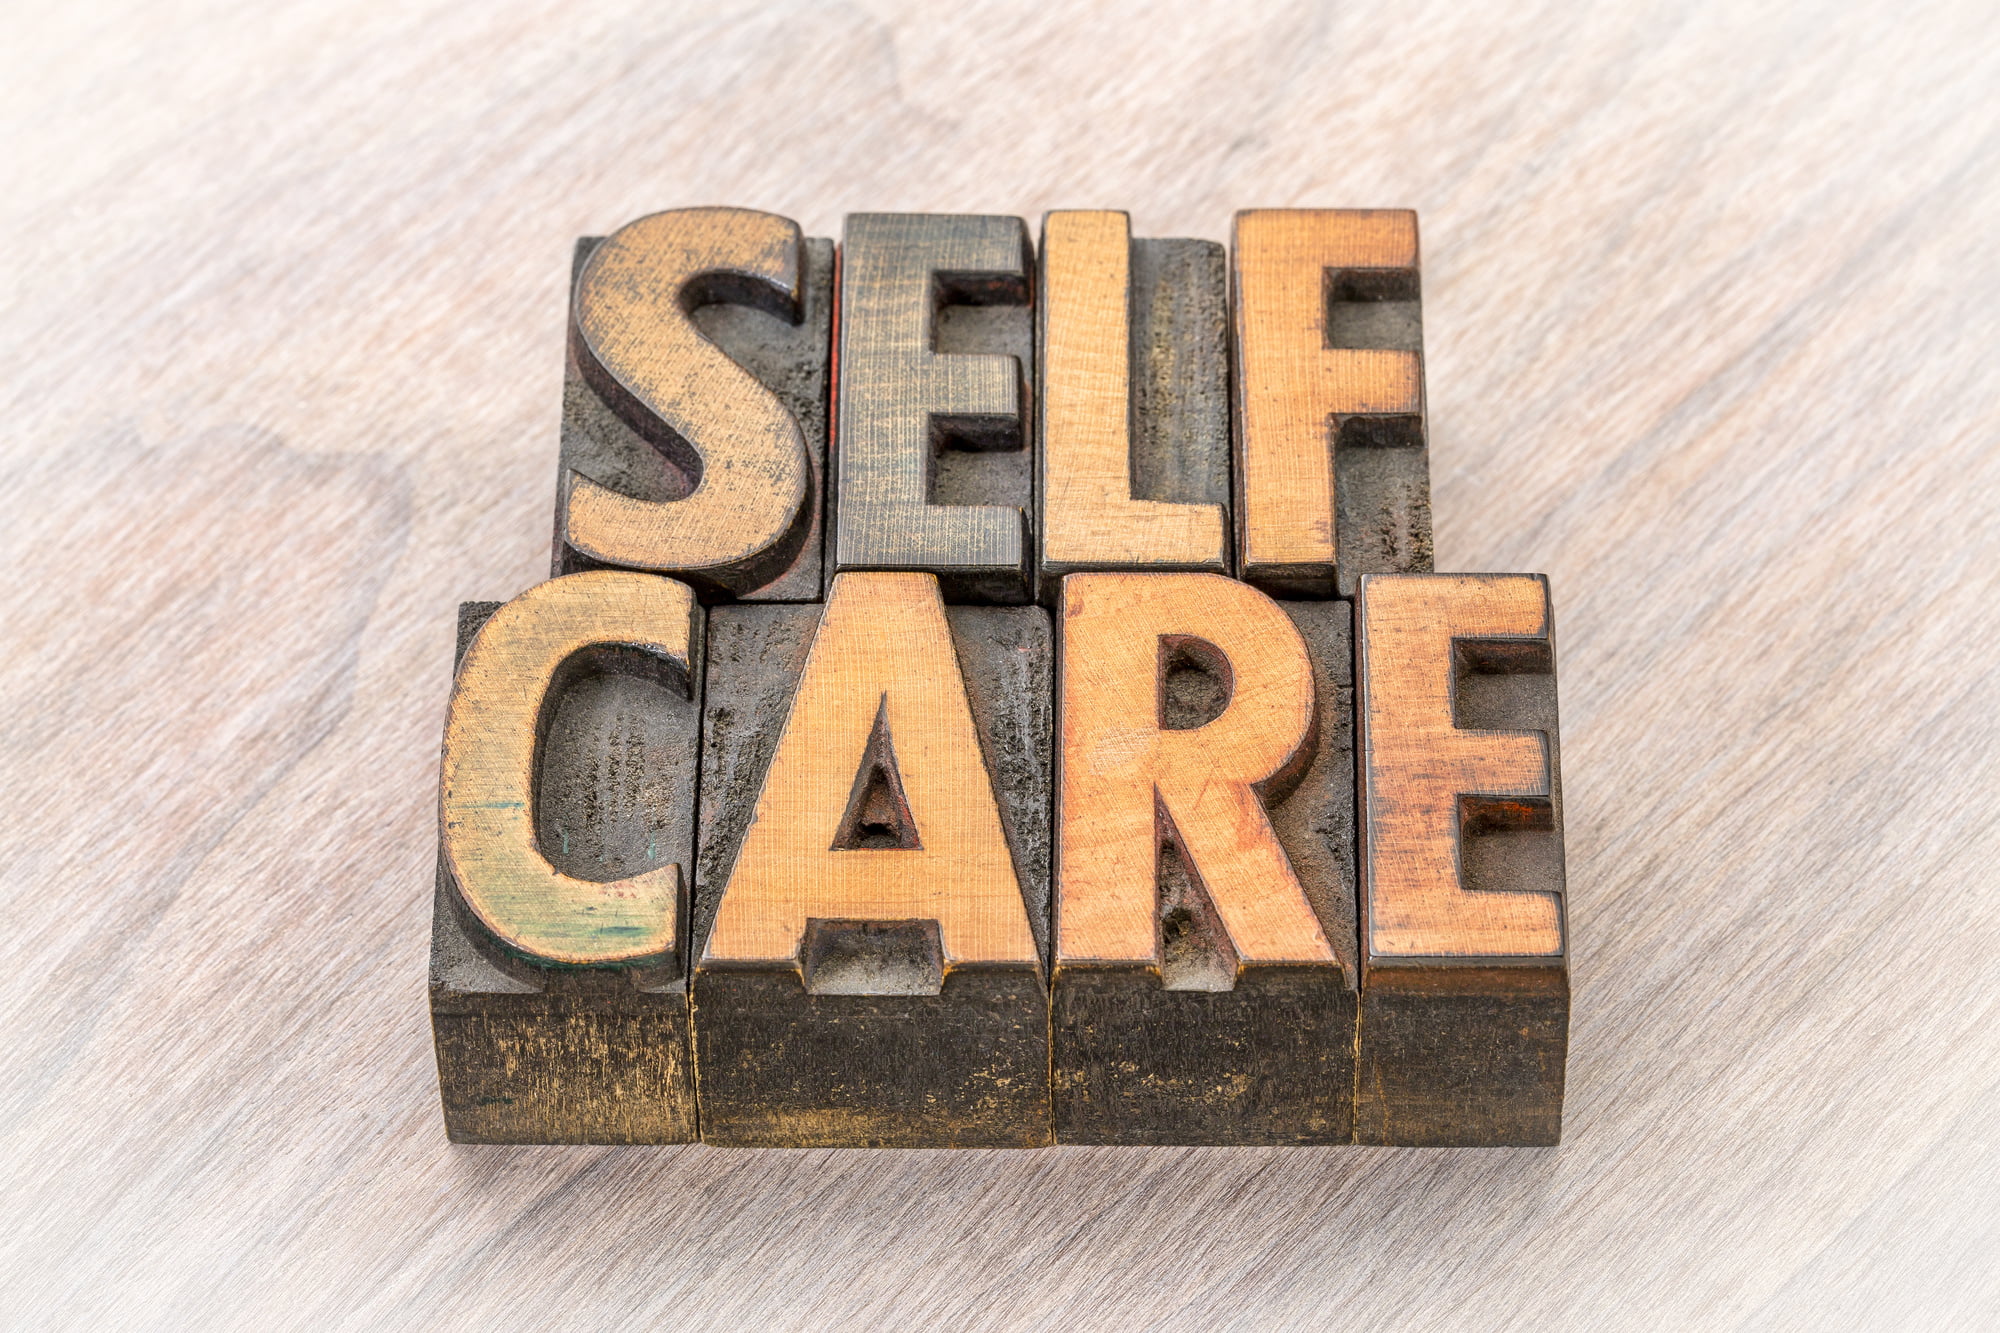 6 Easy Ways to Practice Self-Care on a Daily Basis